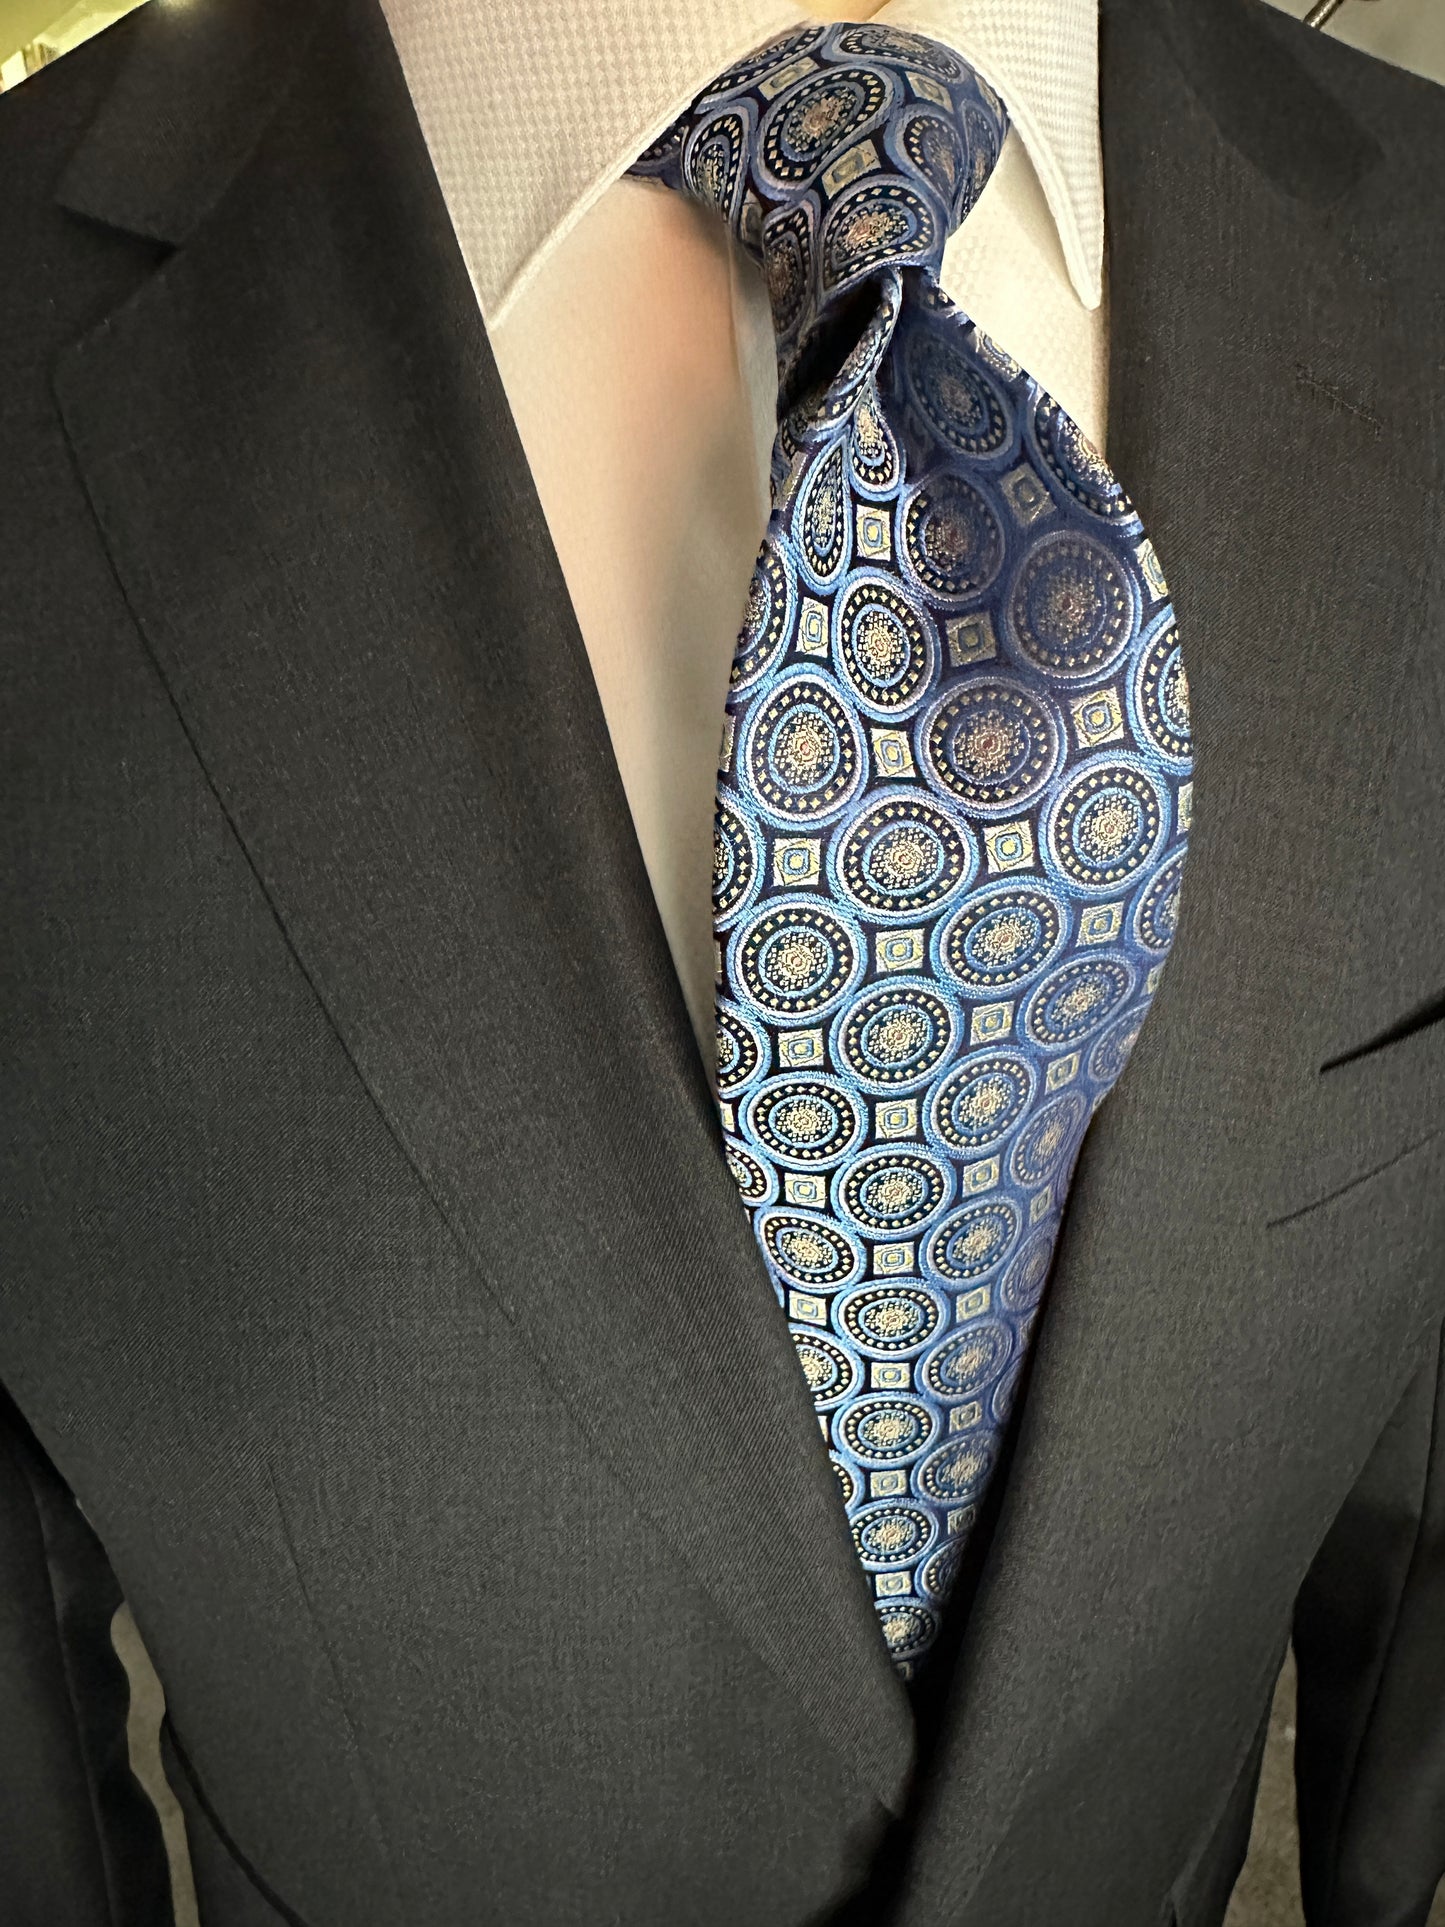 This 100% woven silk tie has a gorgeous weight and thickness to the finish. With woven medallions in shades of blue and taupe, this is a necktie that makes a statement. To be worn with shirts in white, blue, beige and grey. This tie also pairs well with shirts with small plaids and mini checks. See the sister color in purple.